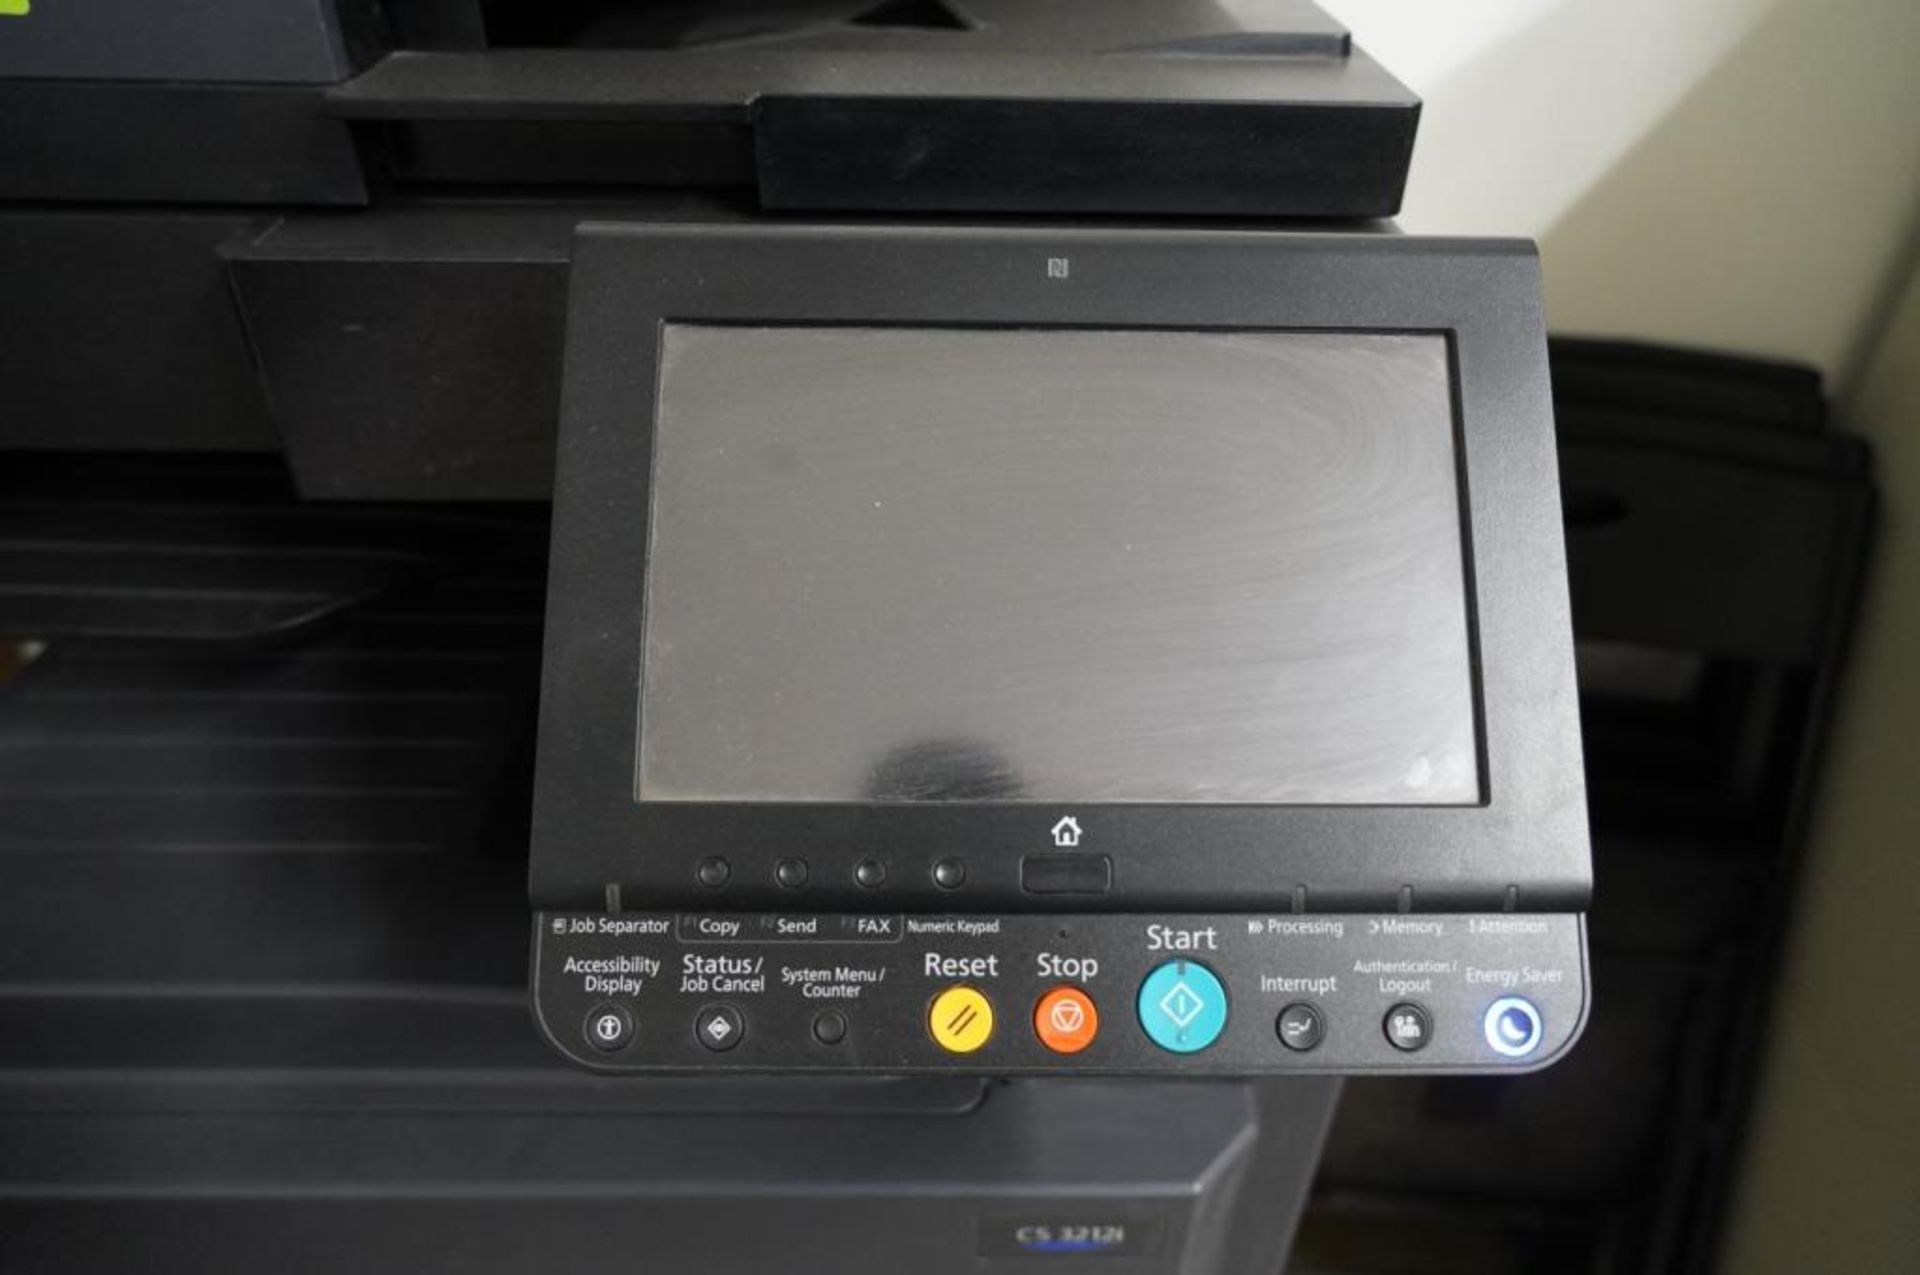 Copystar All in One Photo/Fax/Copy Machine - Image 3 of 4